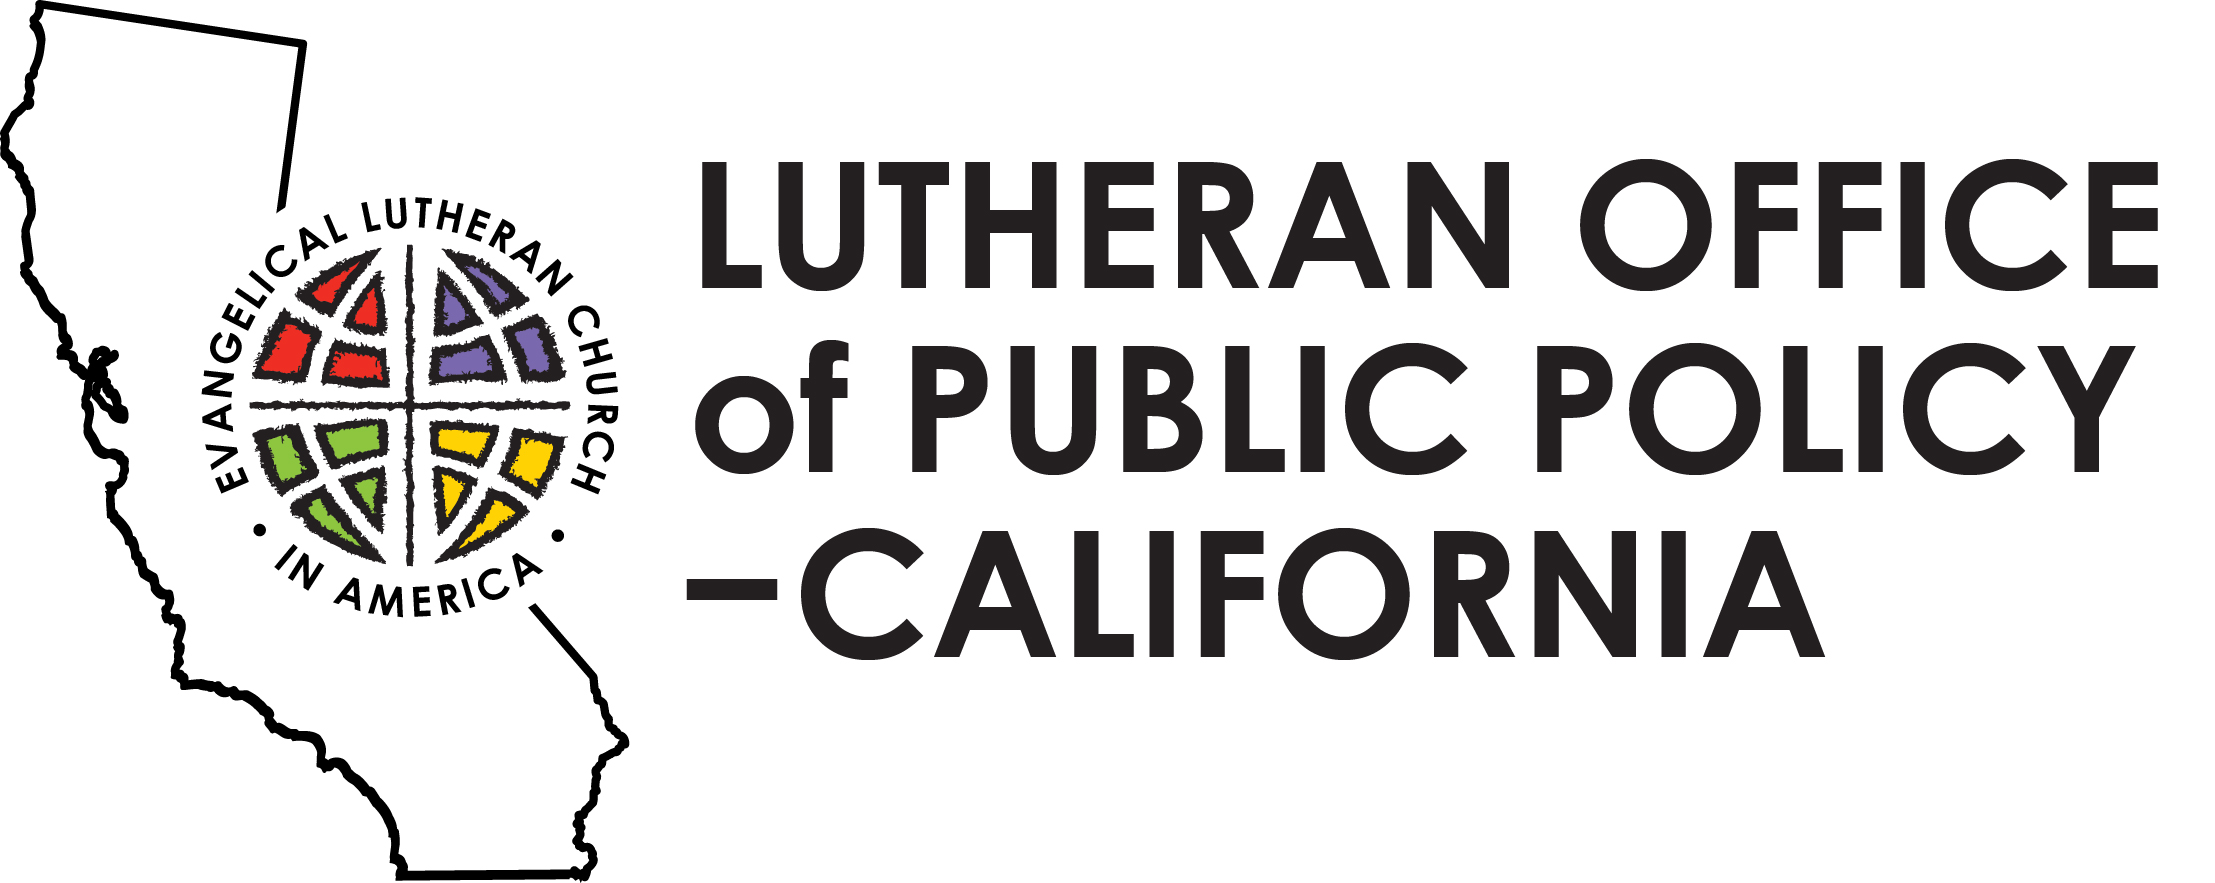 Lutheran Office of Public Policy – California